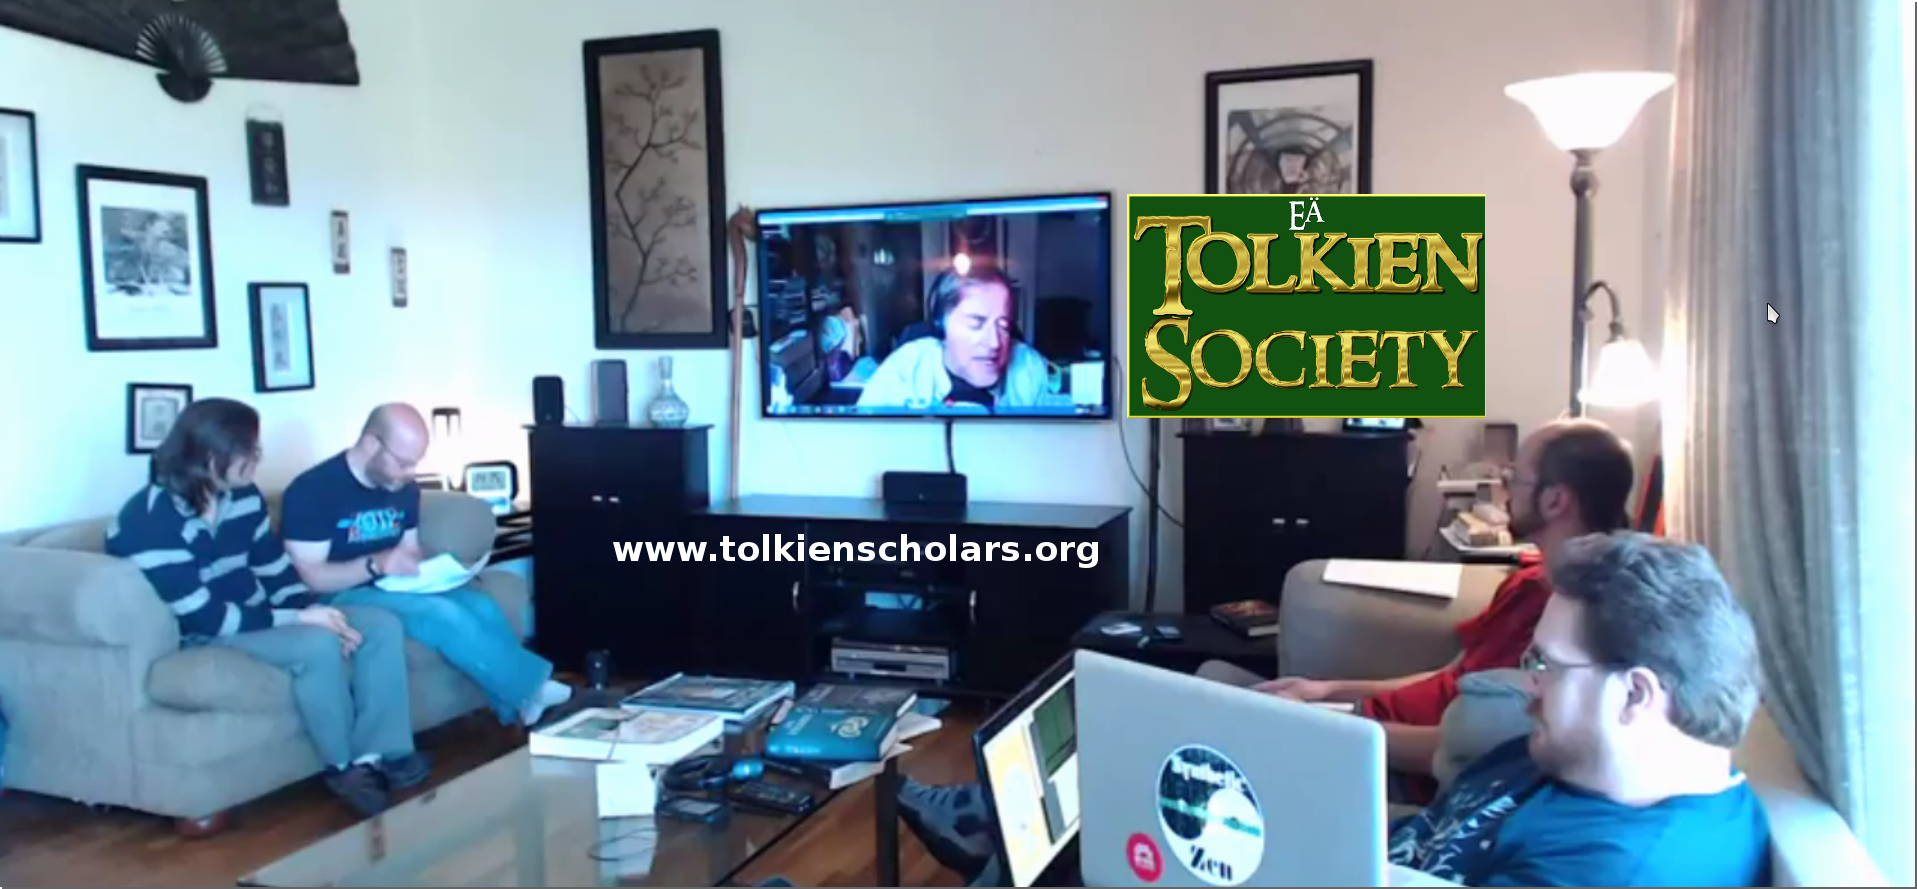 Eä Tolkien Society August 2016 Meeting Moved to AUG 20